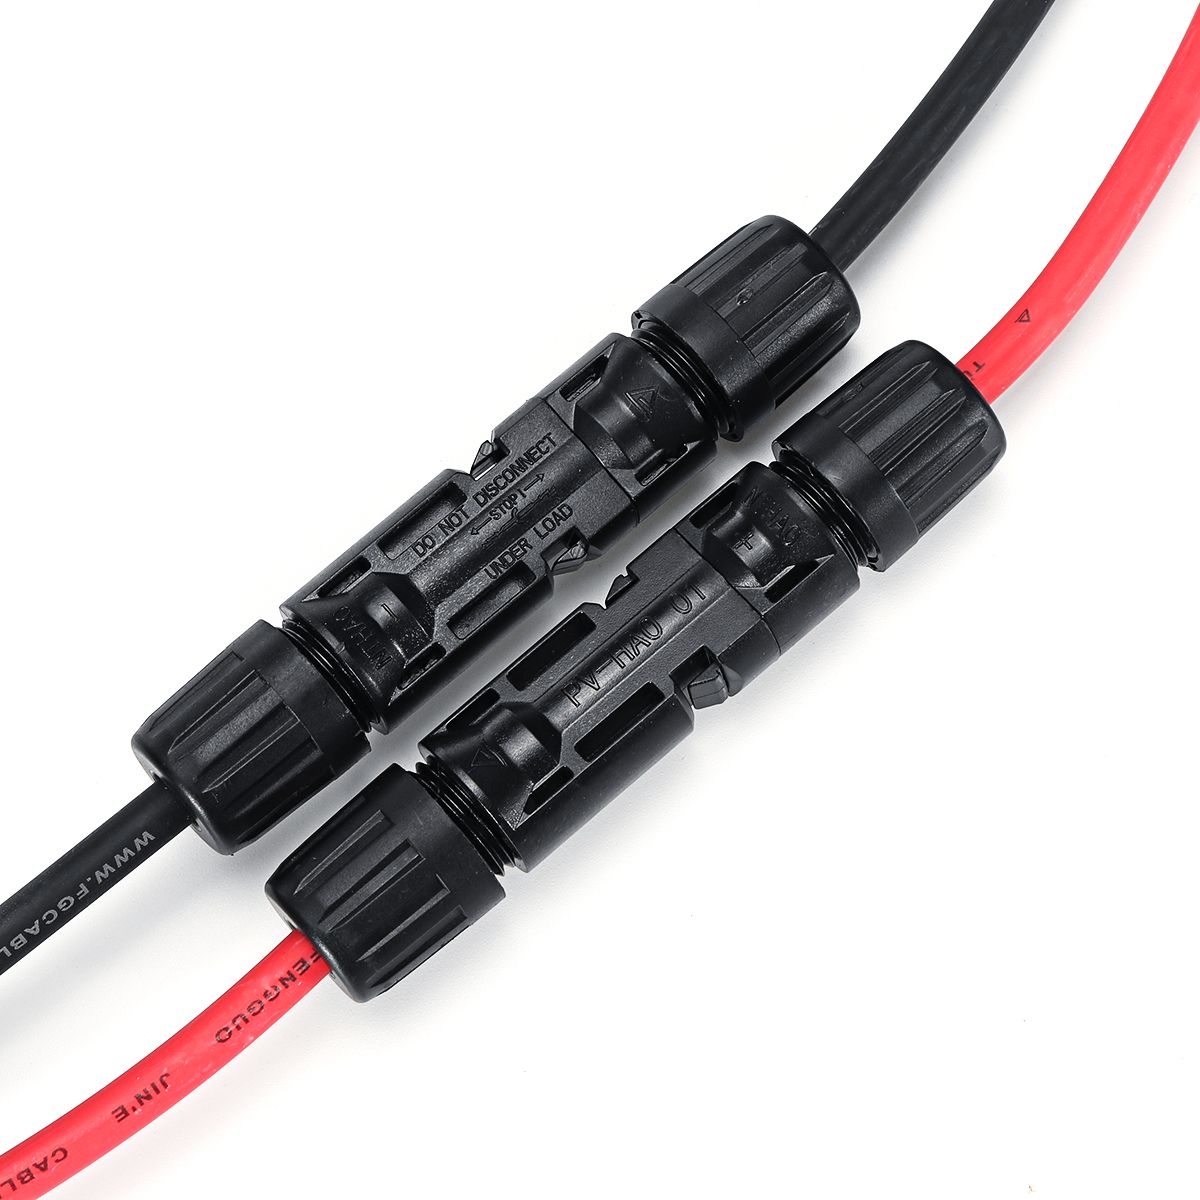 1Pack-12AWG-Solar-Panel-Extension-Cord-MC4-Cable-Line-Connector-Cable-9M8M5M-1534426